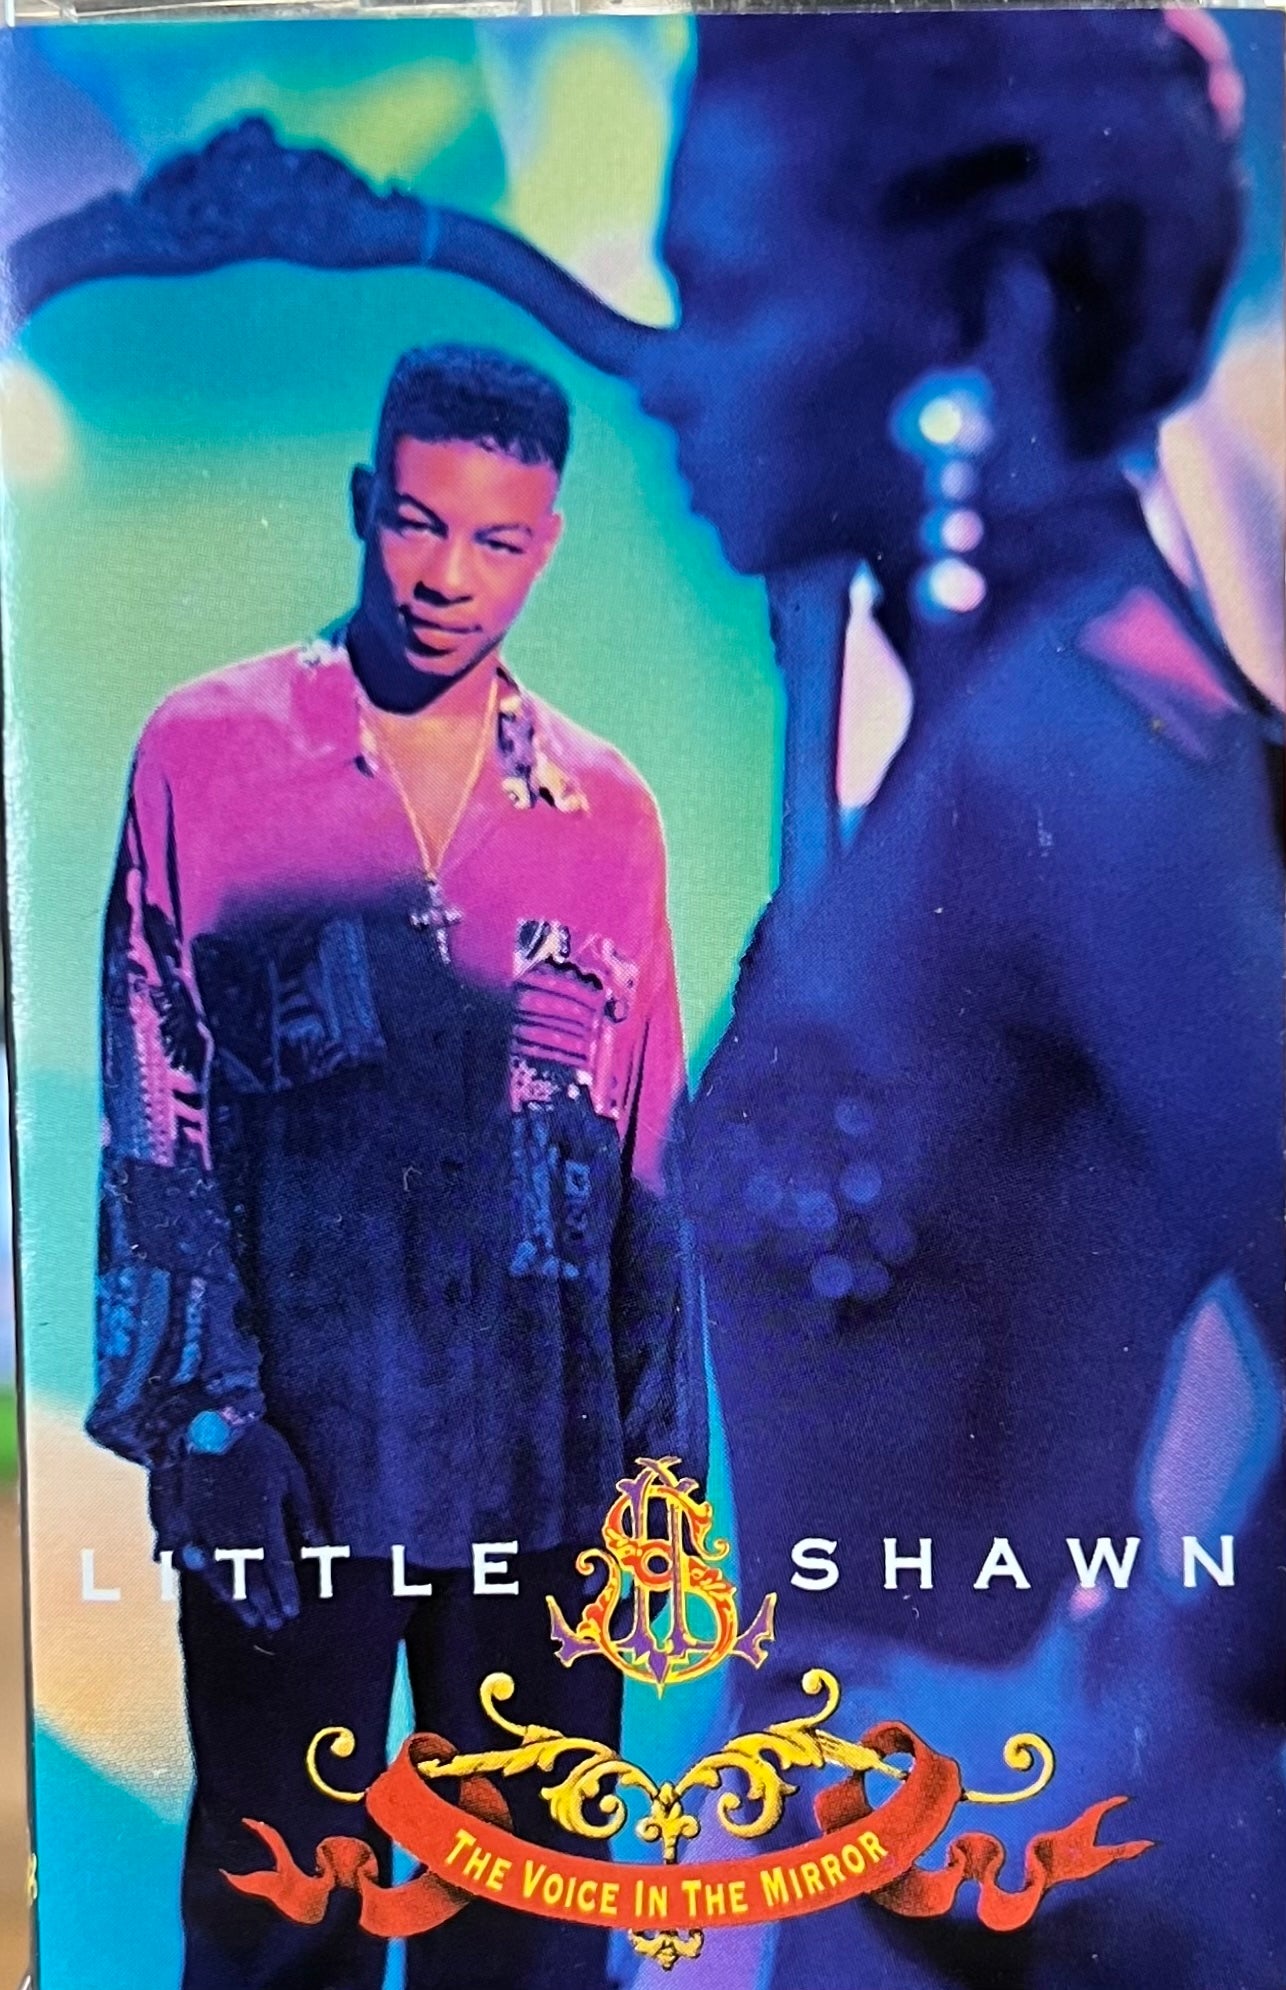 Little Shawn- The Voice In The Mirror - Darkside Records